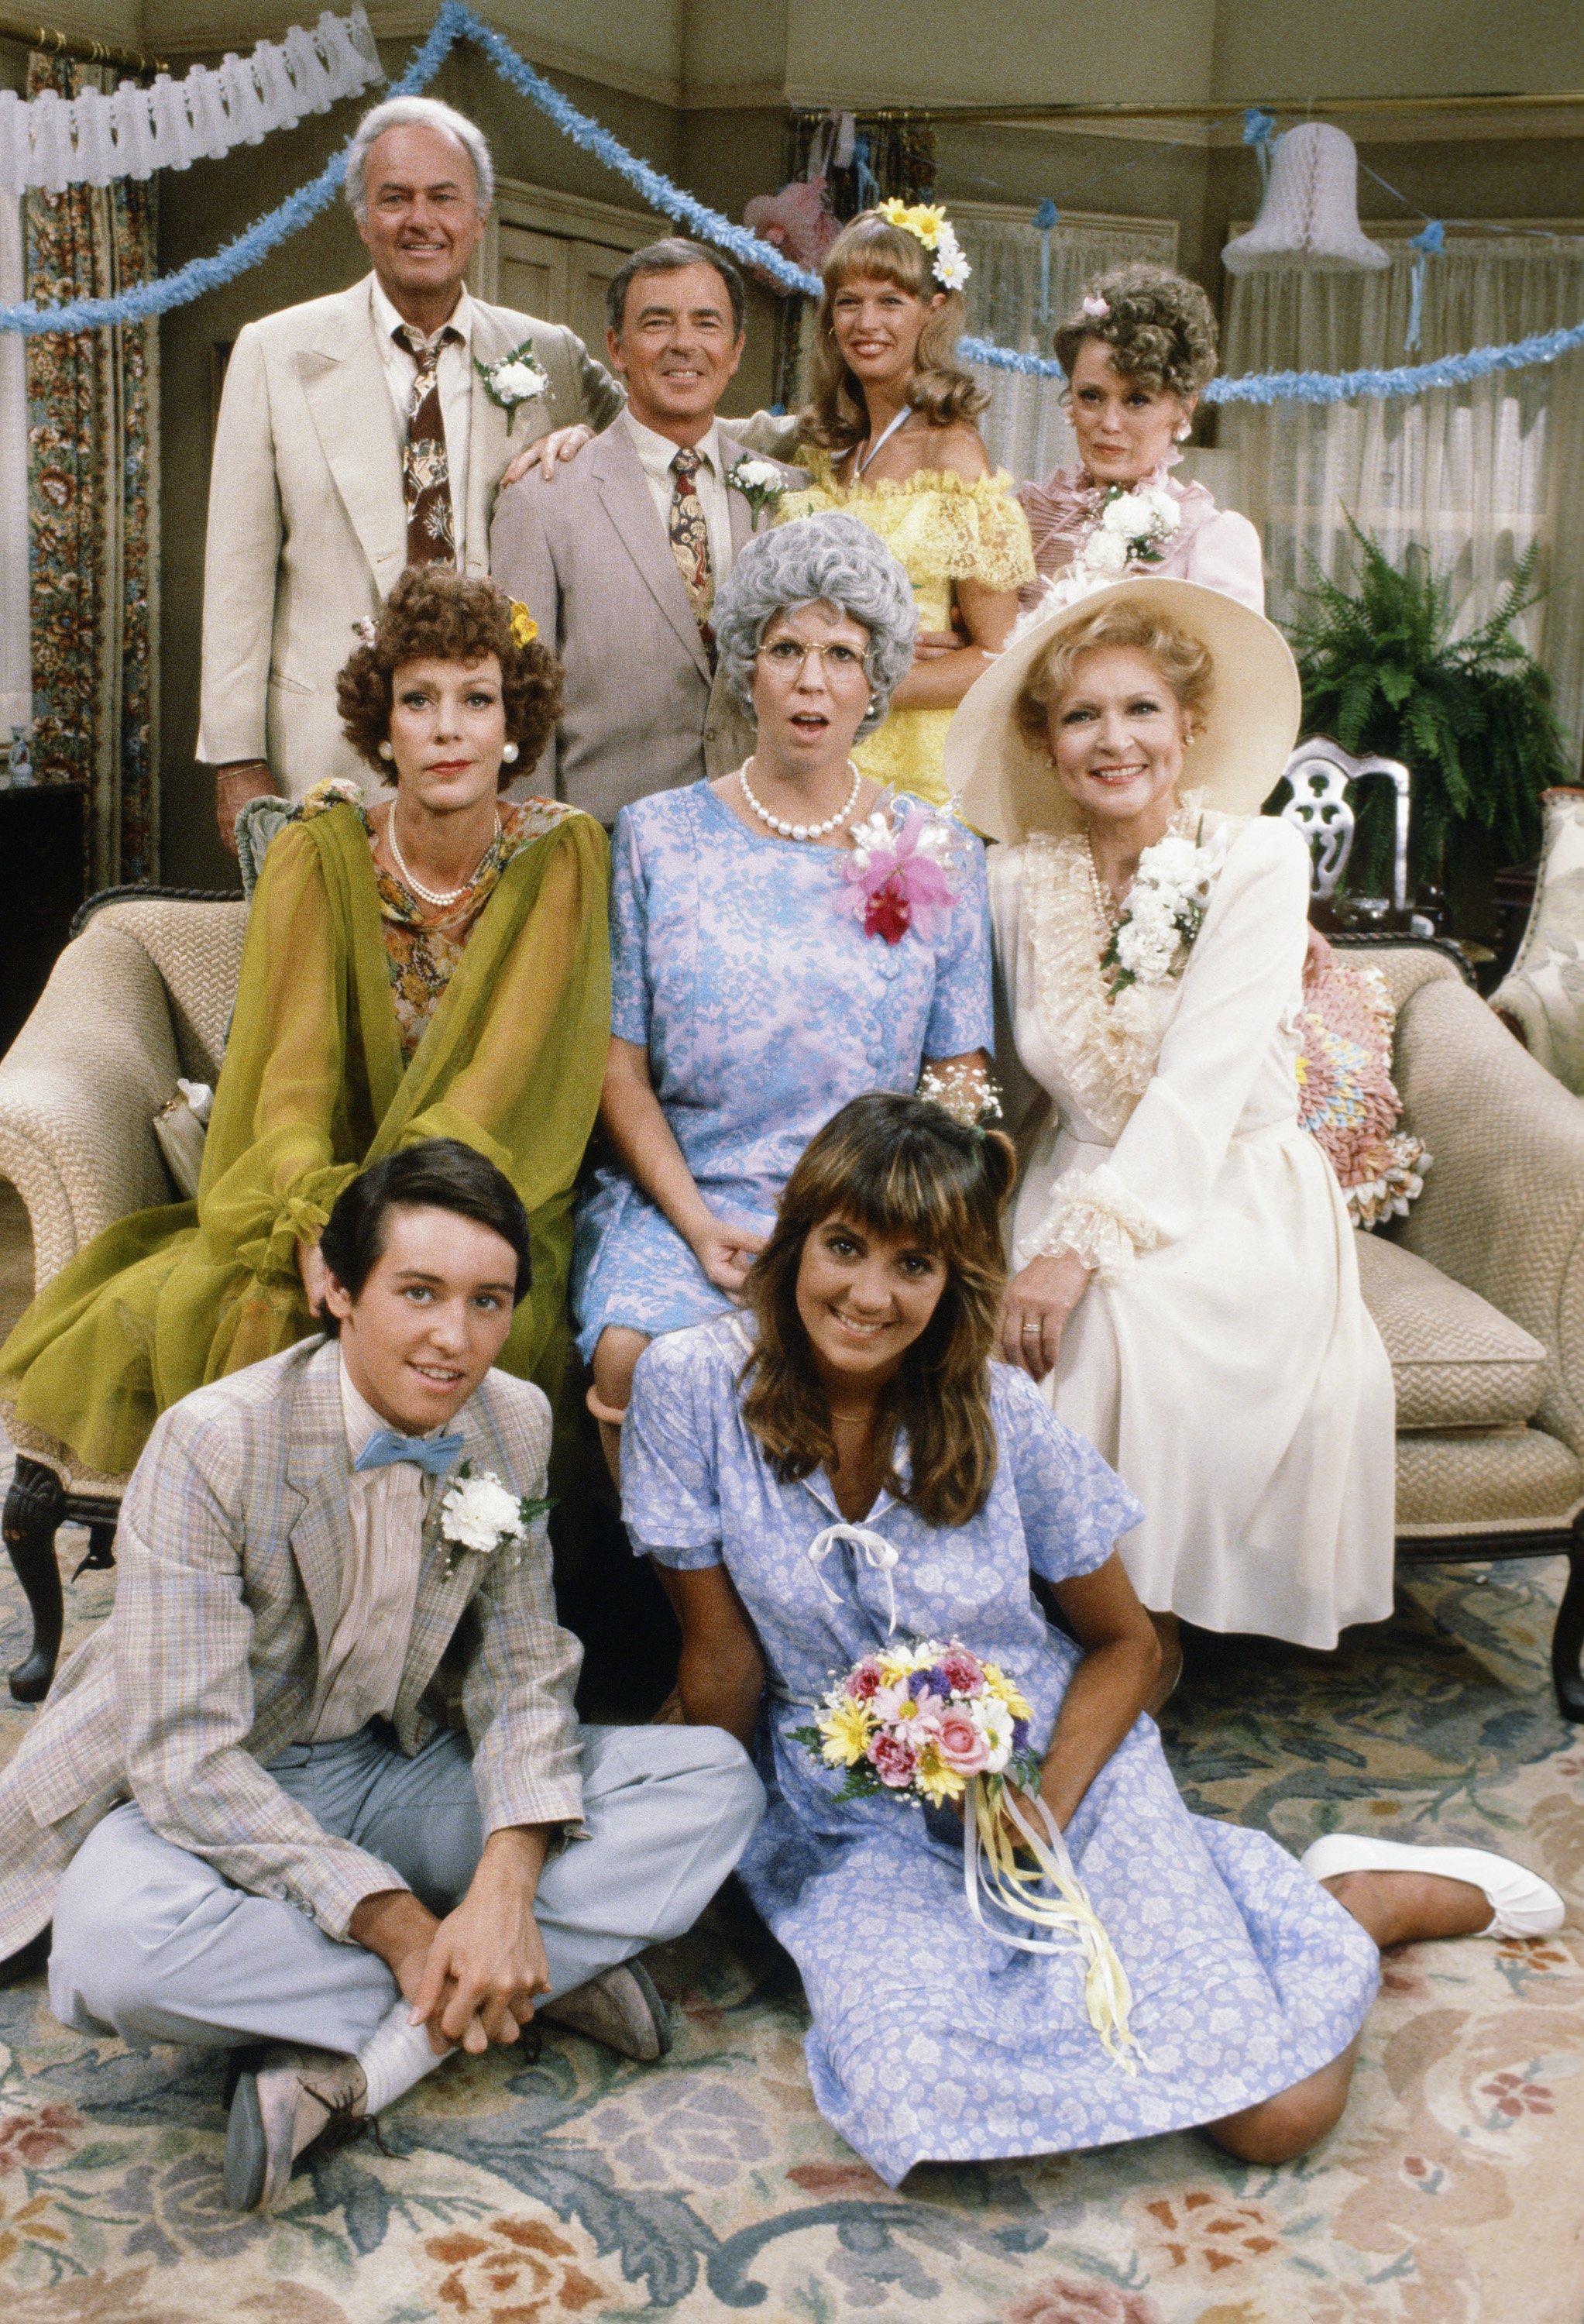 Back row, left to right: Harvey Korman, Ken Berry, Dorothy Lyman, and Rue McClanahan. Middle row, left to right: Carol Burnett, Vicki Lawrence, and Betty White. Front row, left to right: Eric Brown and Karin Argoud on "Mama's Family" | Source: Getty Images